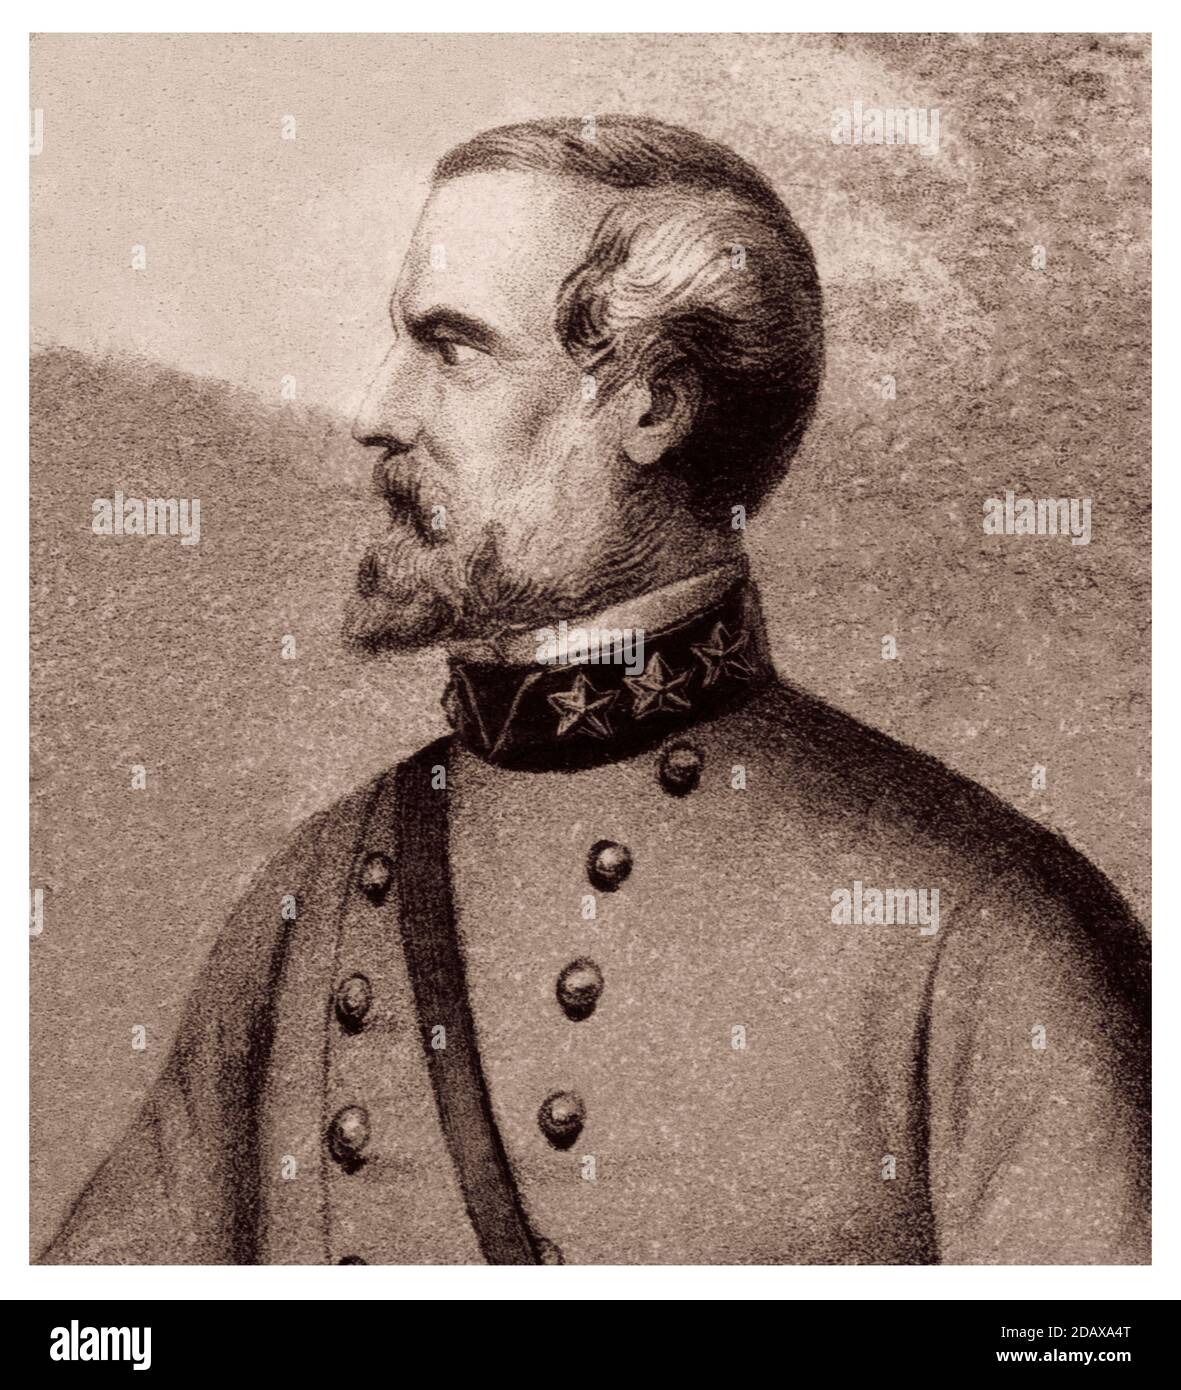 Engraving of Robert Edward Lee.  Robert Edward Lee (1807 – 1870) was an American Confederate general best known as a commander of the Confederate Stat Stock Photo